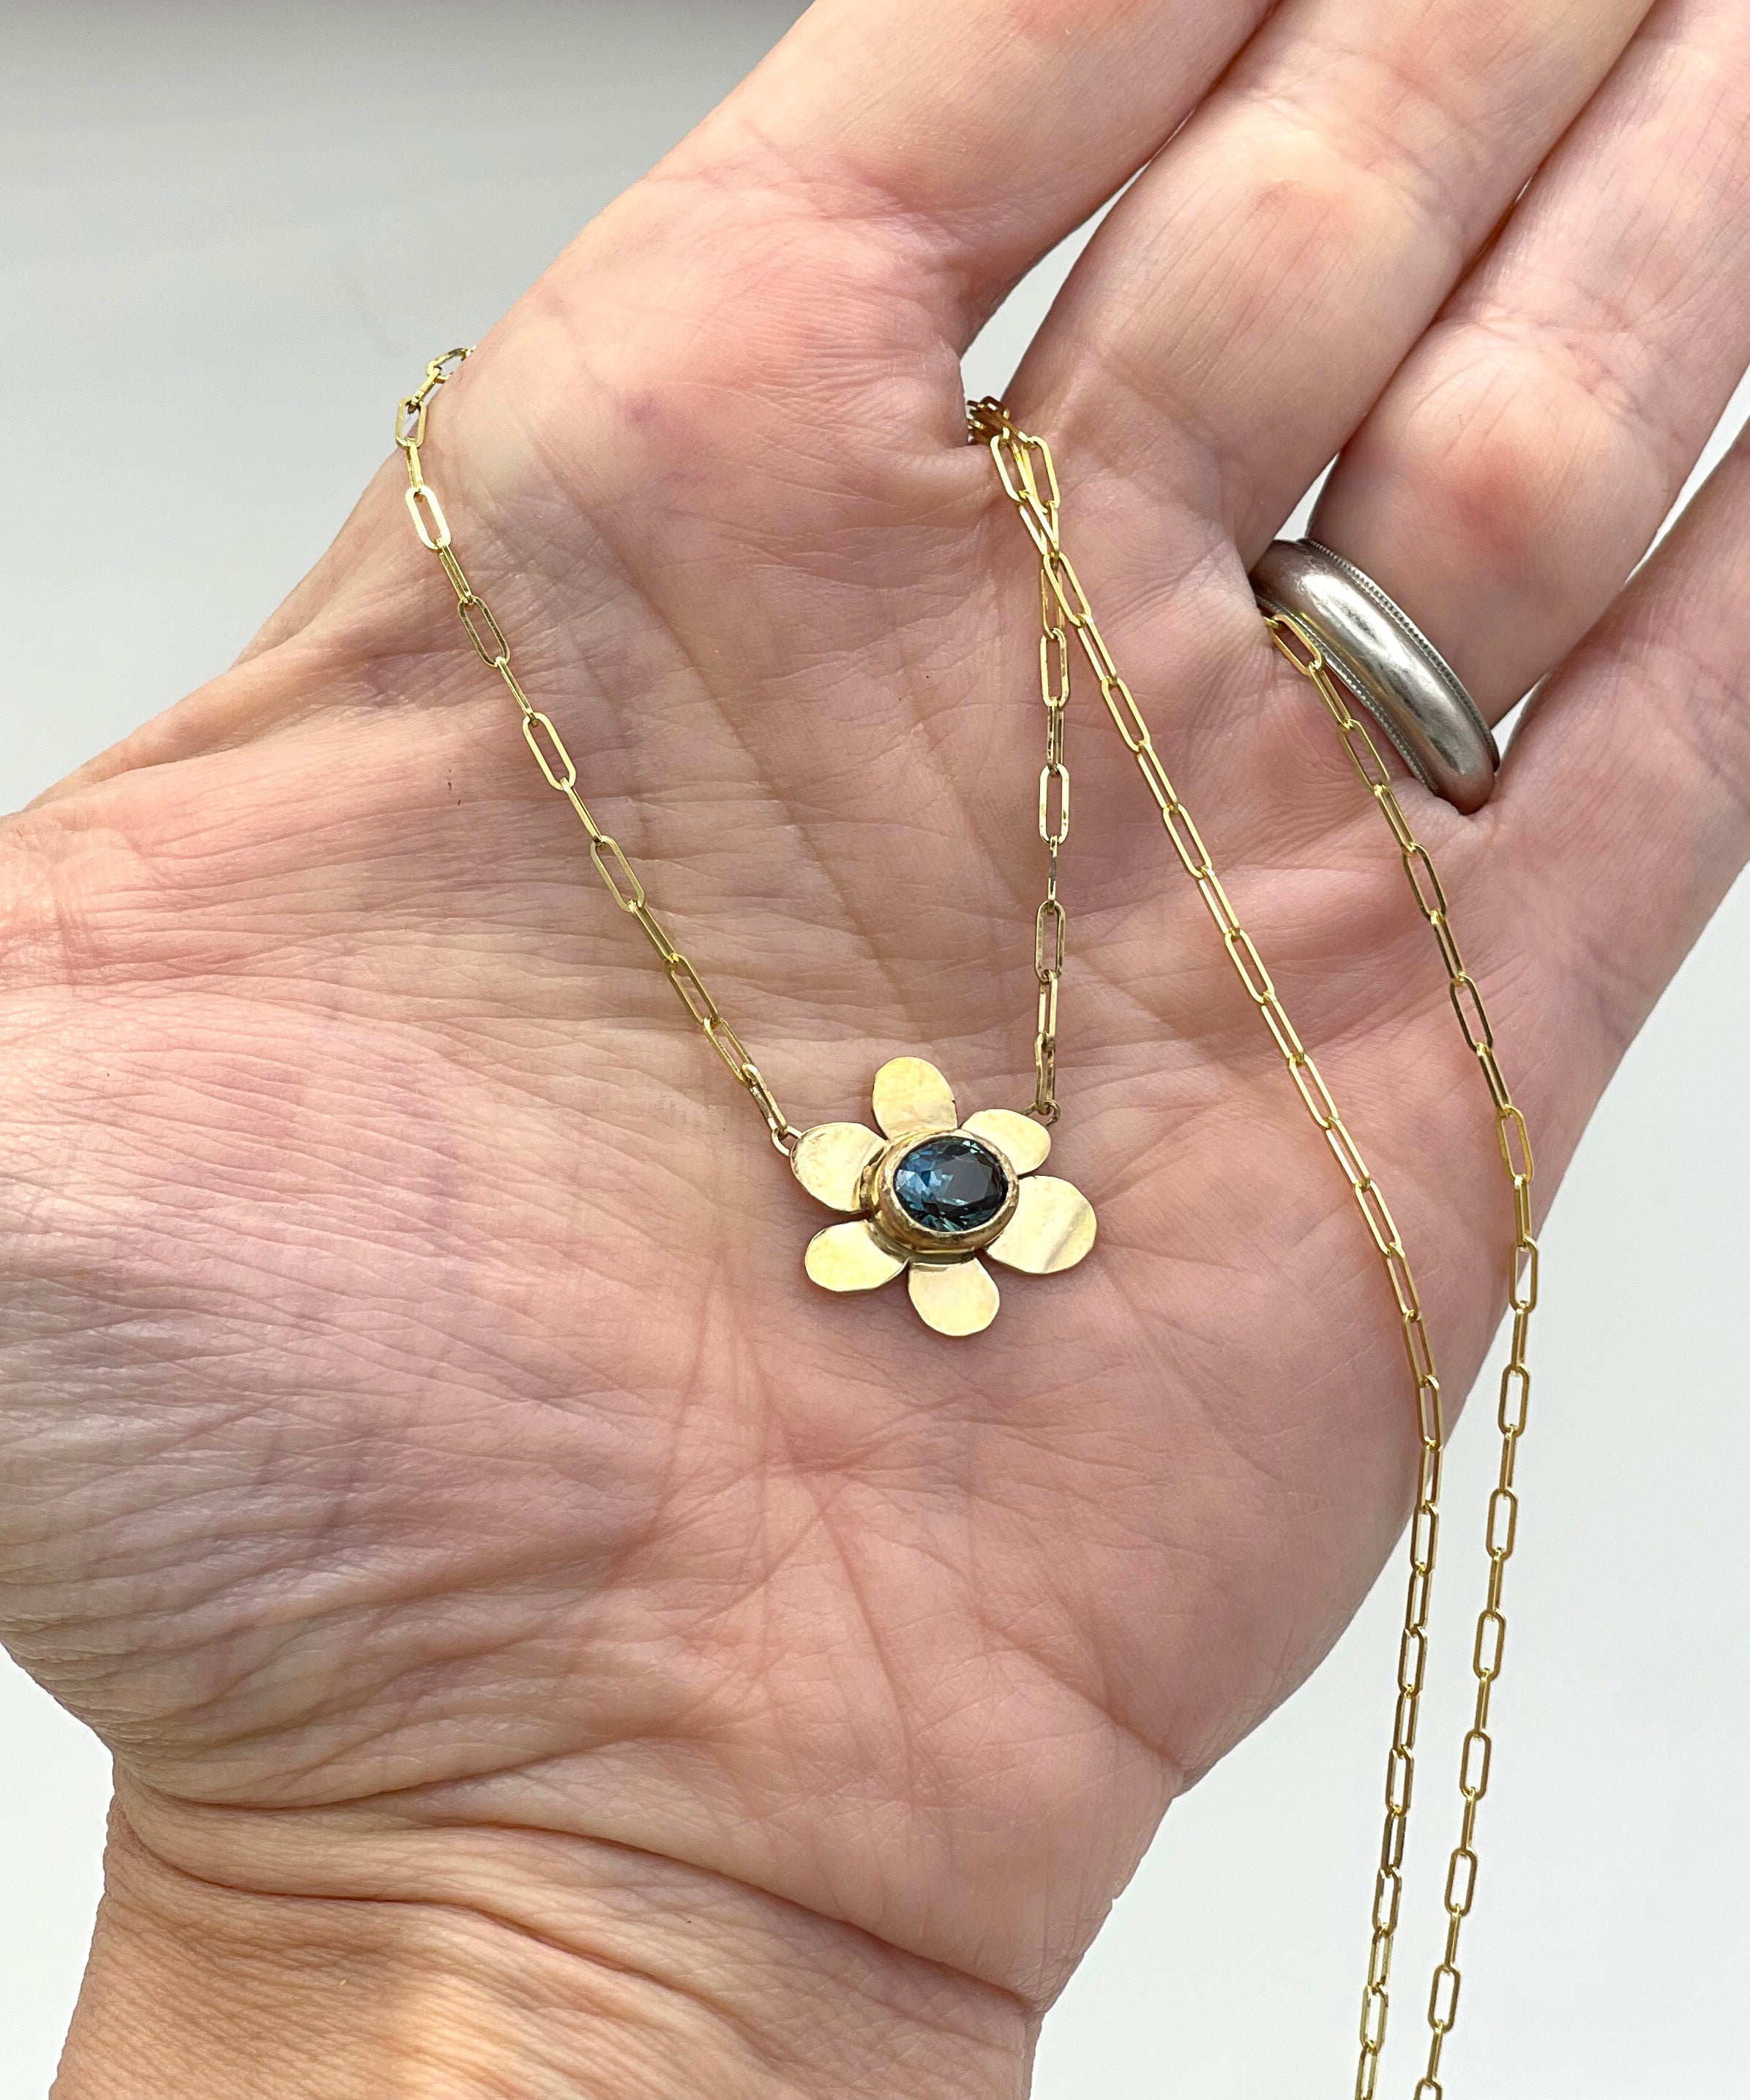 Blue Sapphire Flower Necklace, 14K Solid Yellow Gold